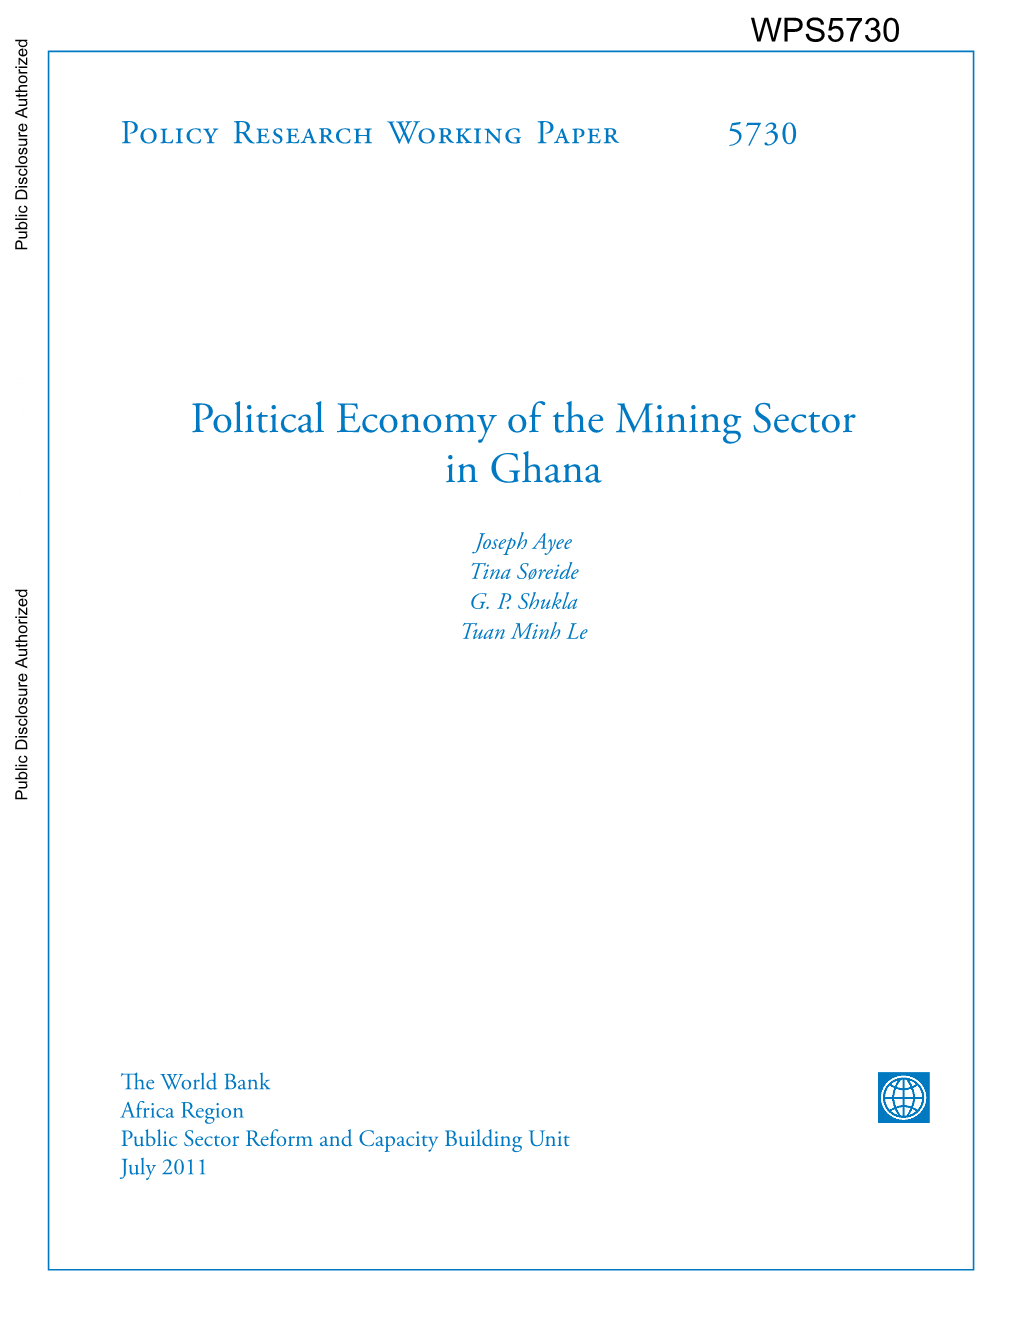 4091-Political-Economy-Of-The-Mining-Sector-In-Ghana.Pdf